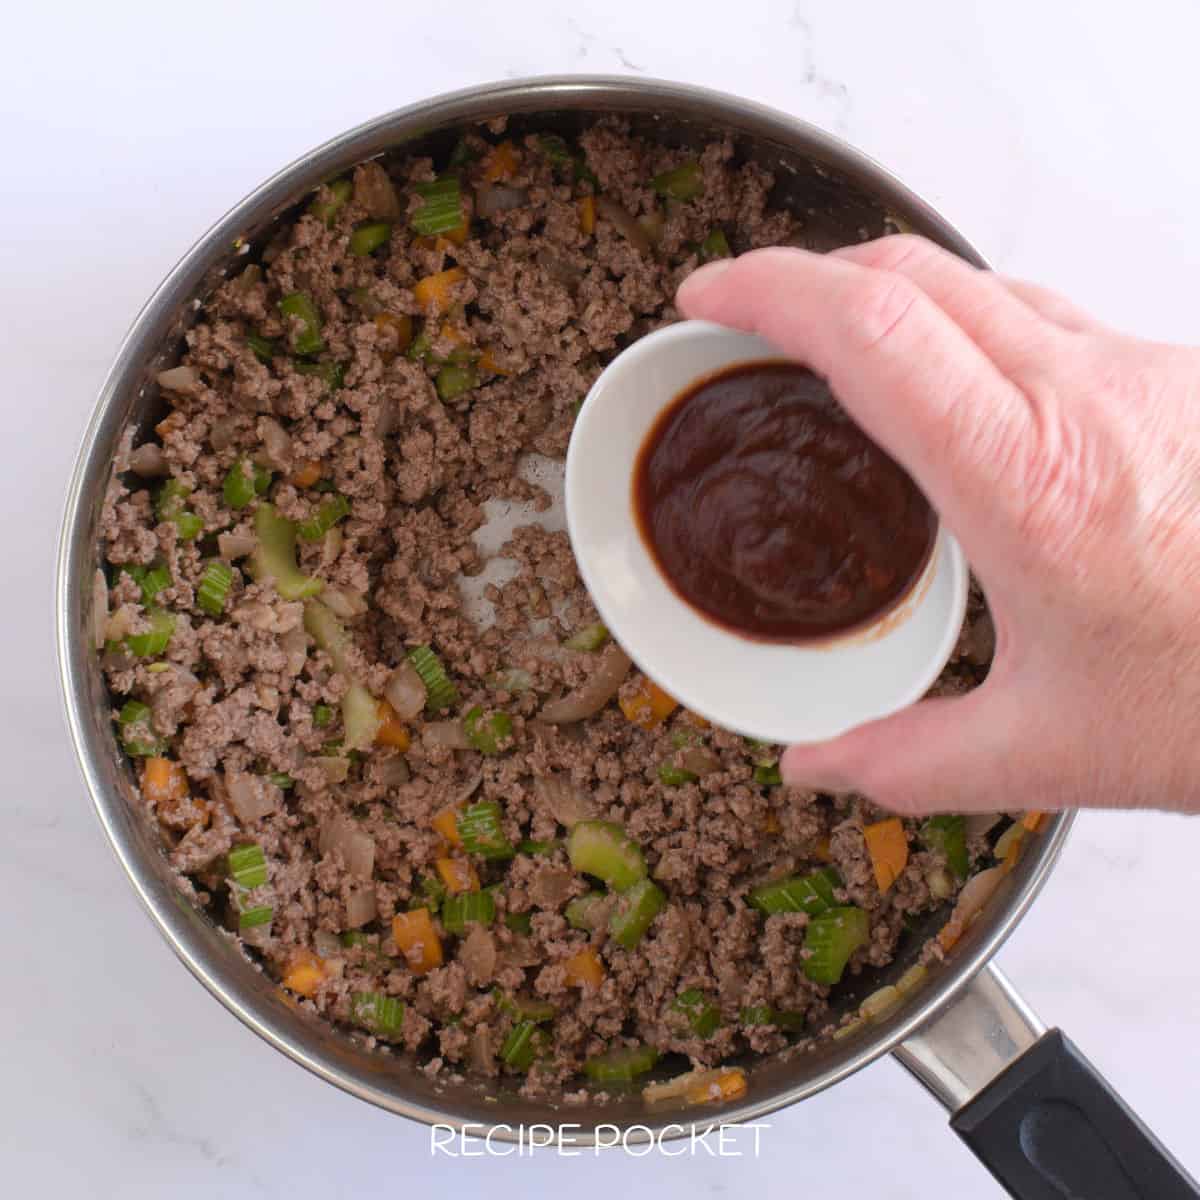 A hand holding tomato paste in a small bowl over a pot of cooked ground beef.